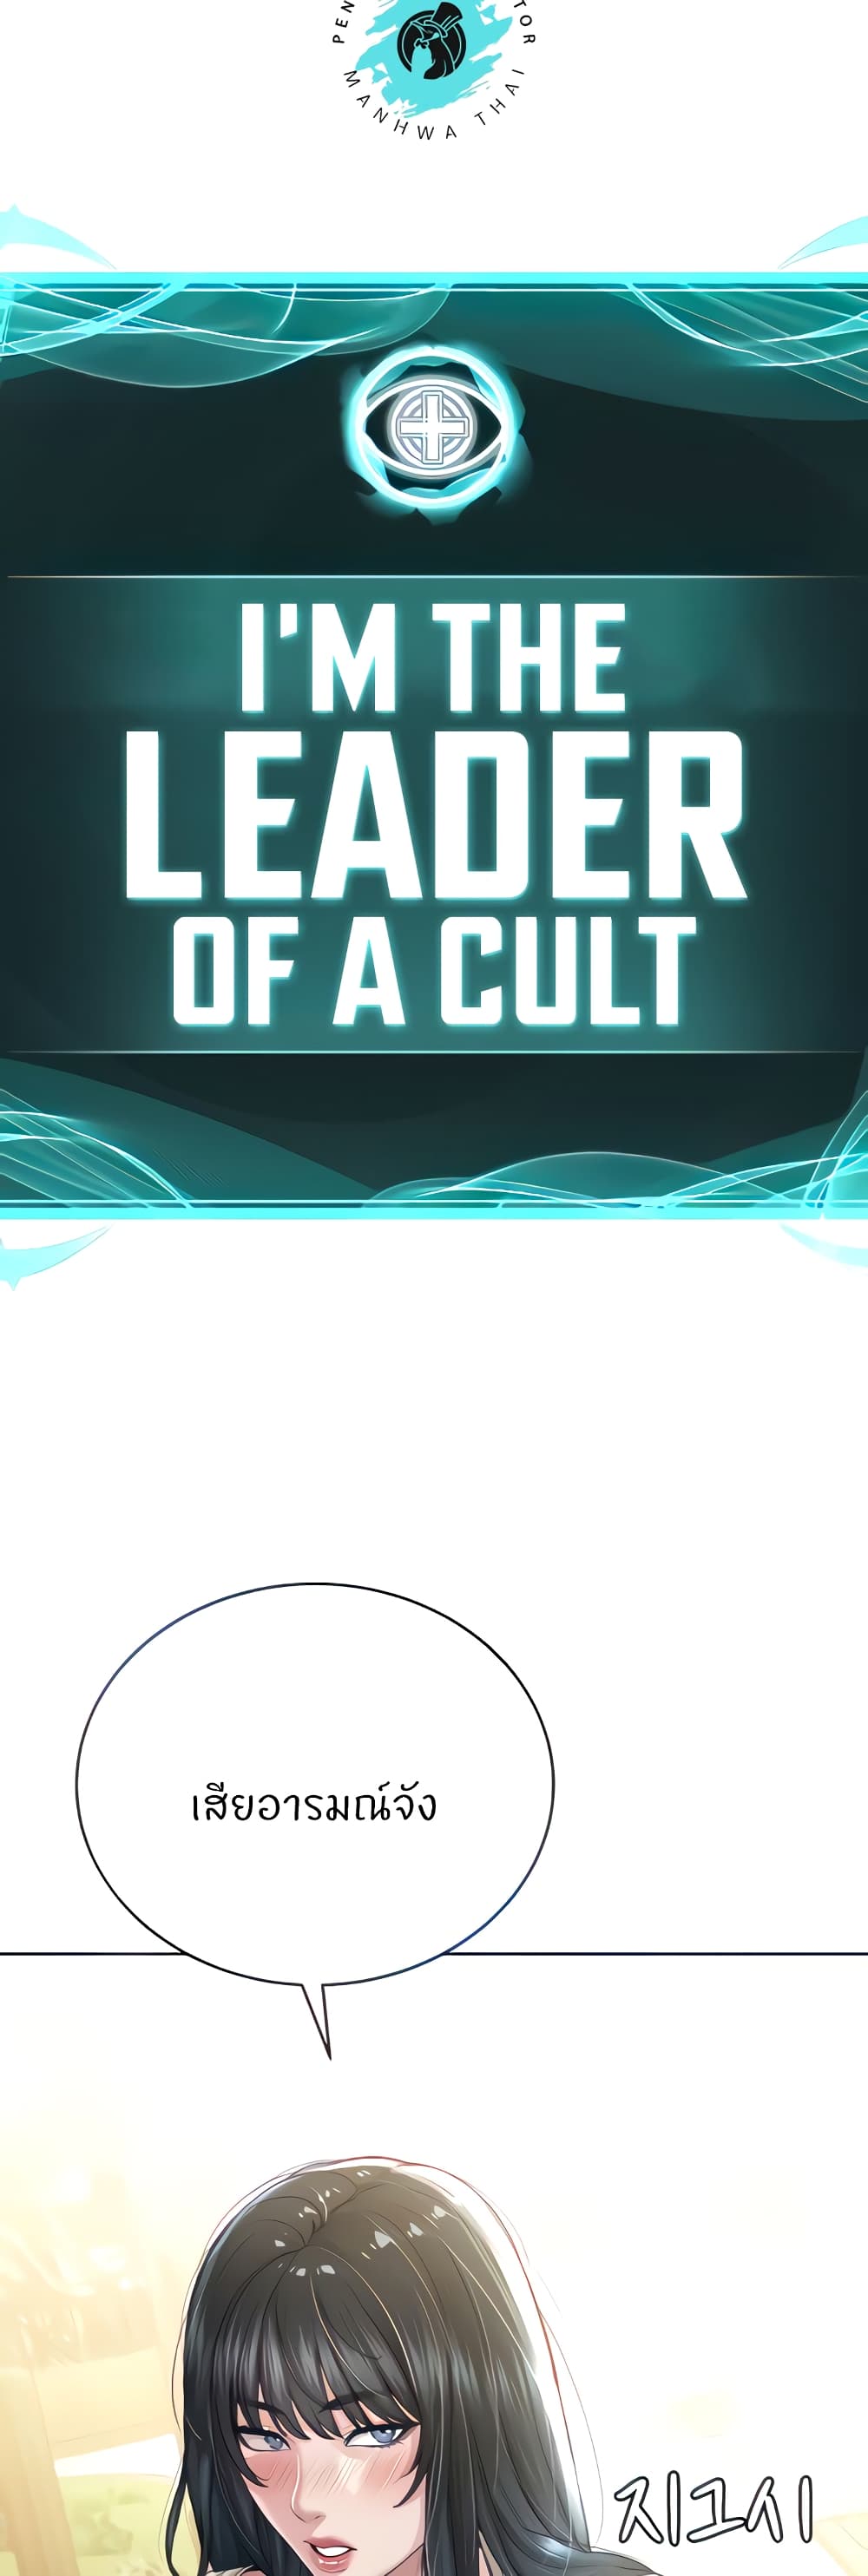 I’m The Leader Of A Cult 21-21